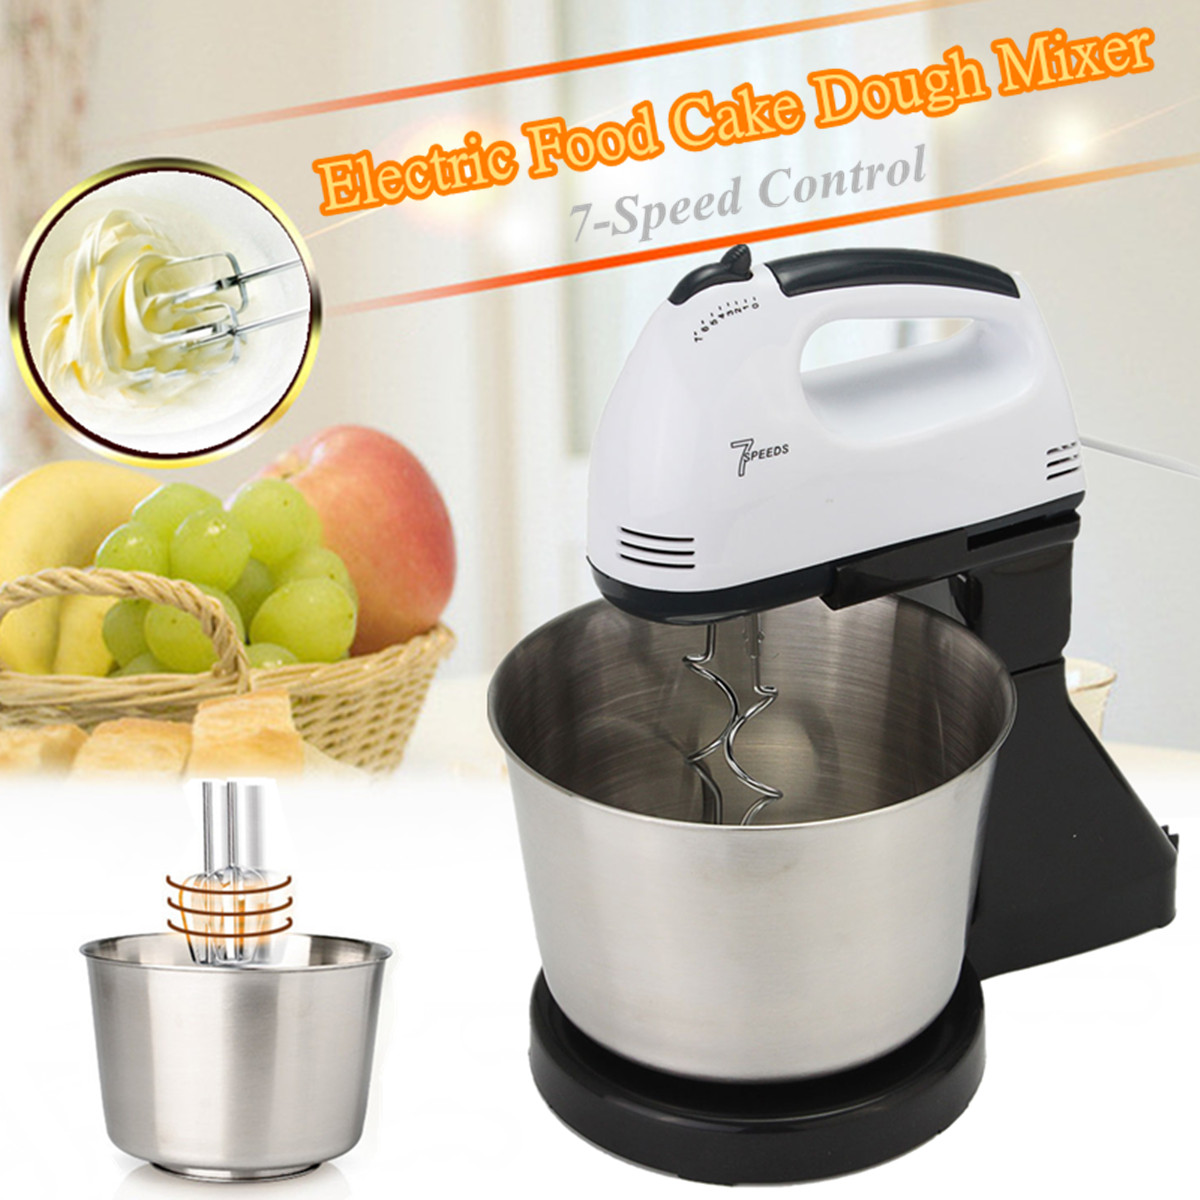 7 Speed Electric Egg Beater Dough Cakes Bread Egg Stand Mixer + Hand Blender + Bowl Food Mixer Kitchen Accessories Egg Tools 36